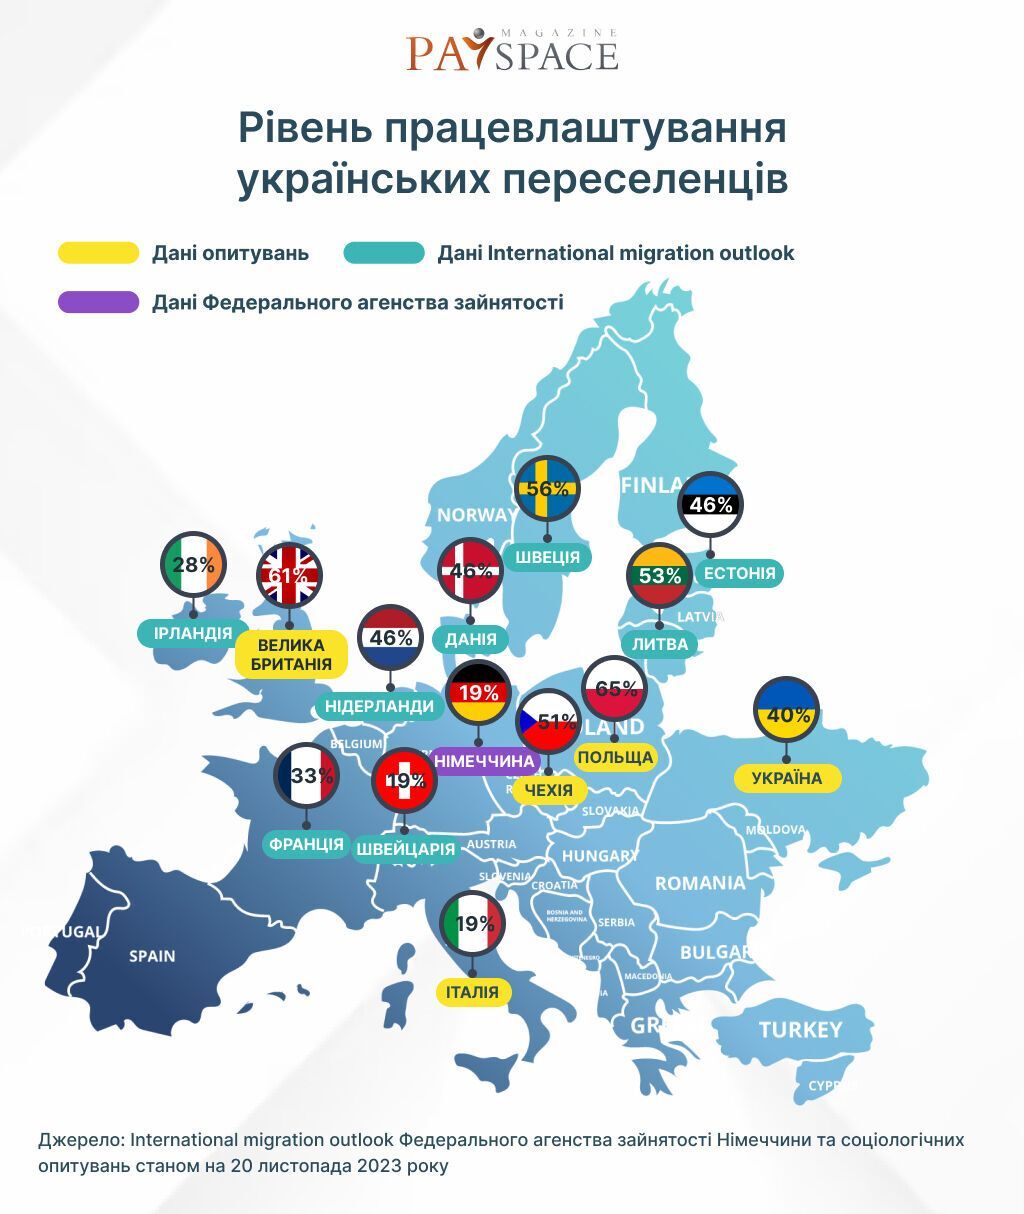 In which European countries Ukrainians work most actively